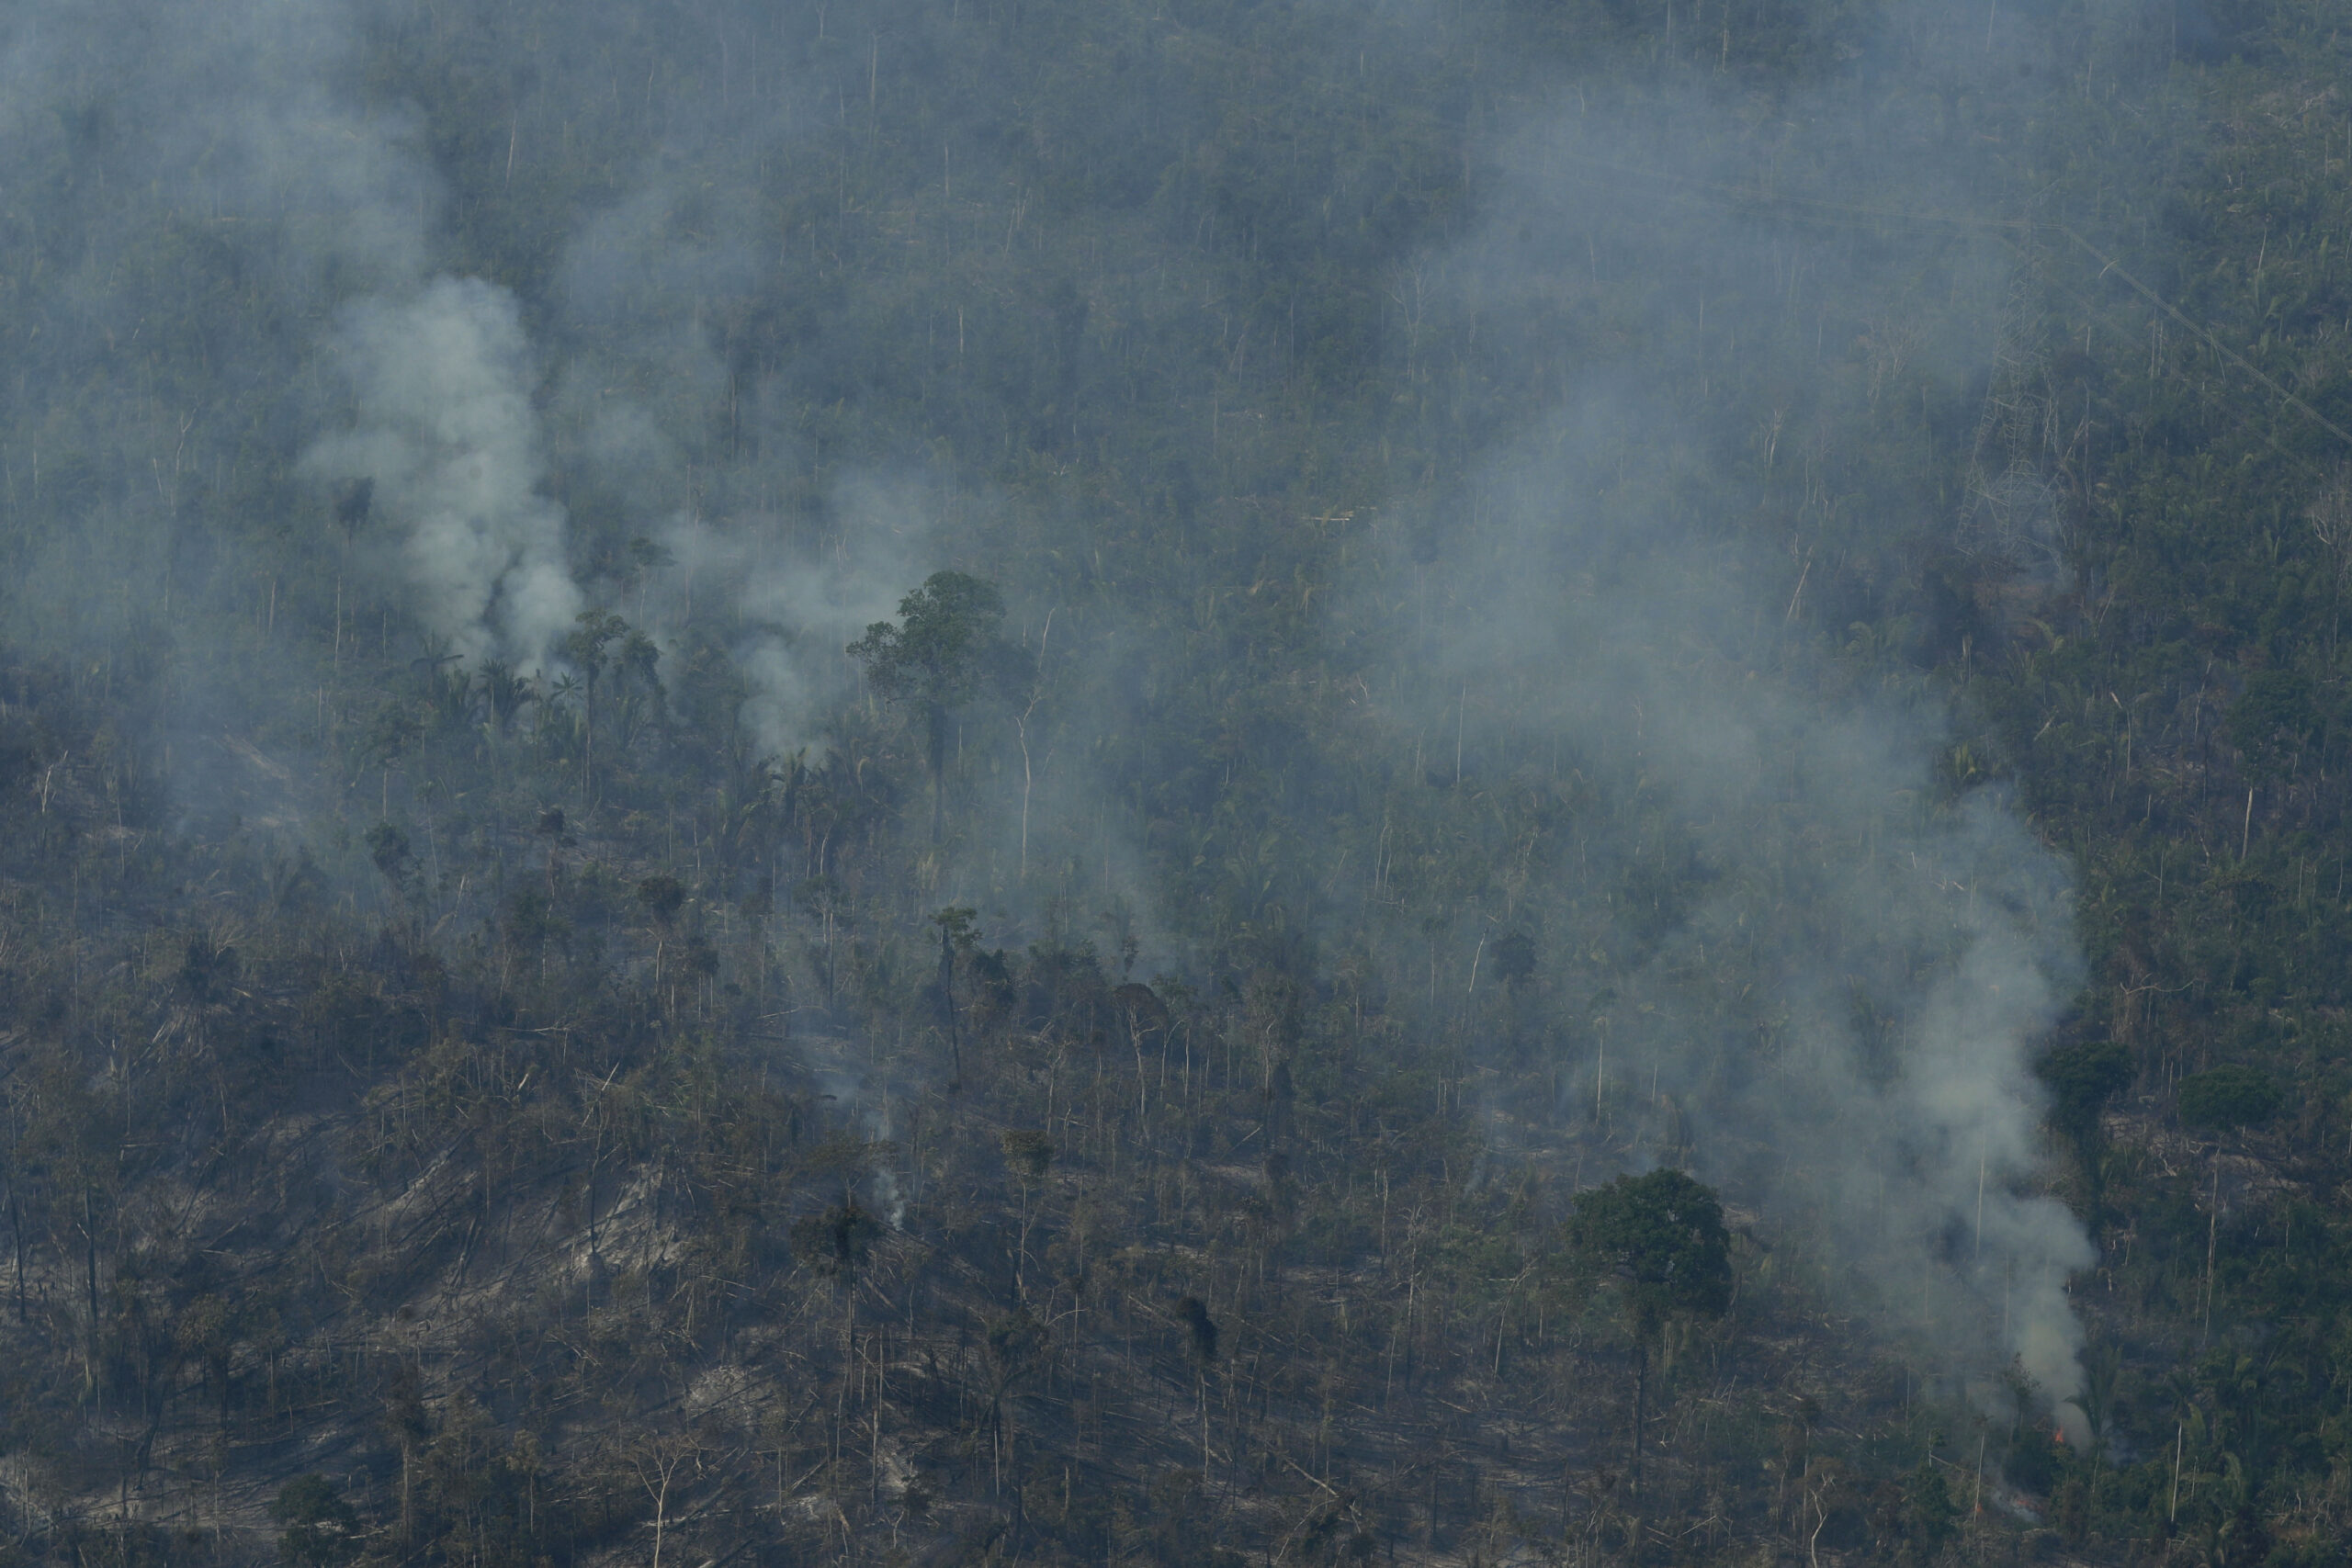 Fires in the Amazon have given us a lot to worry about, but the Earth’s oxygen supply isn’t one of them